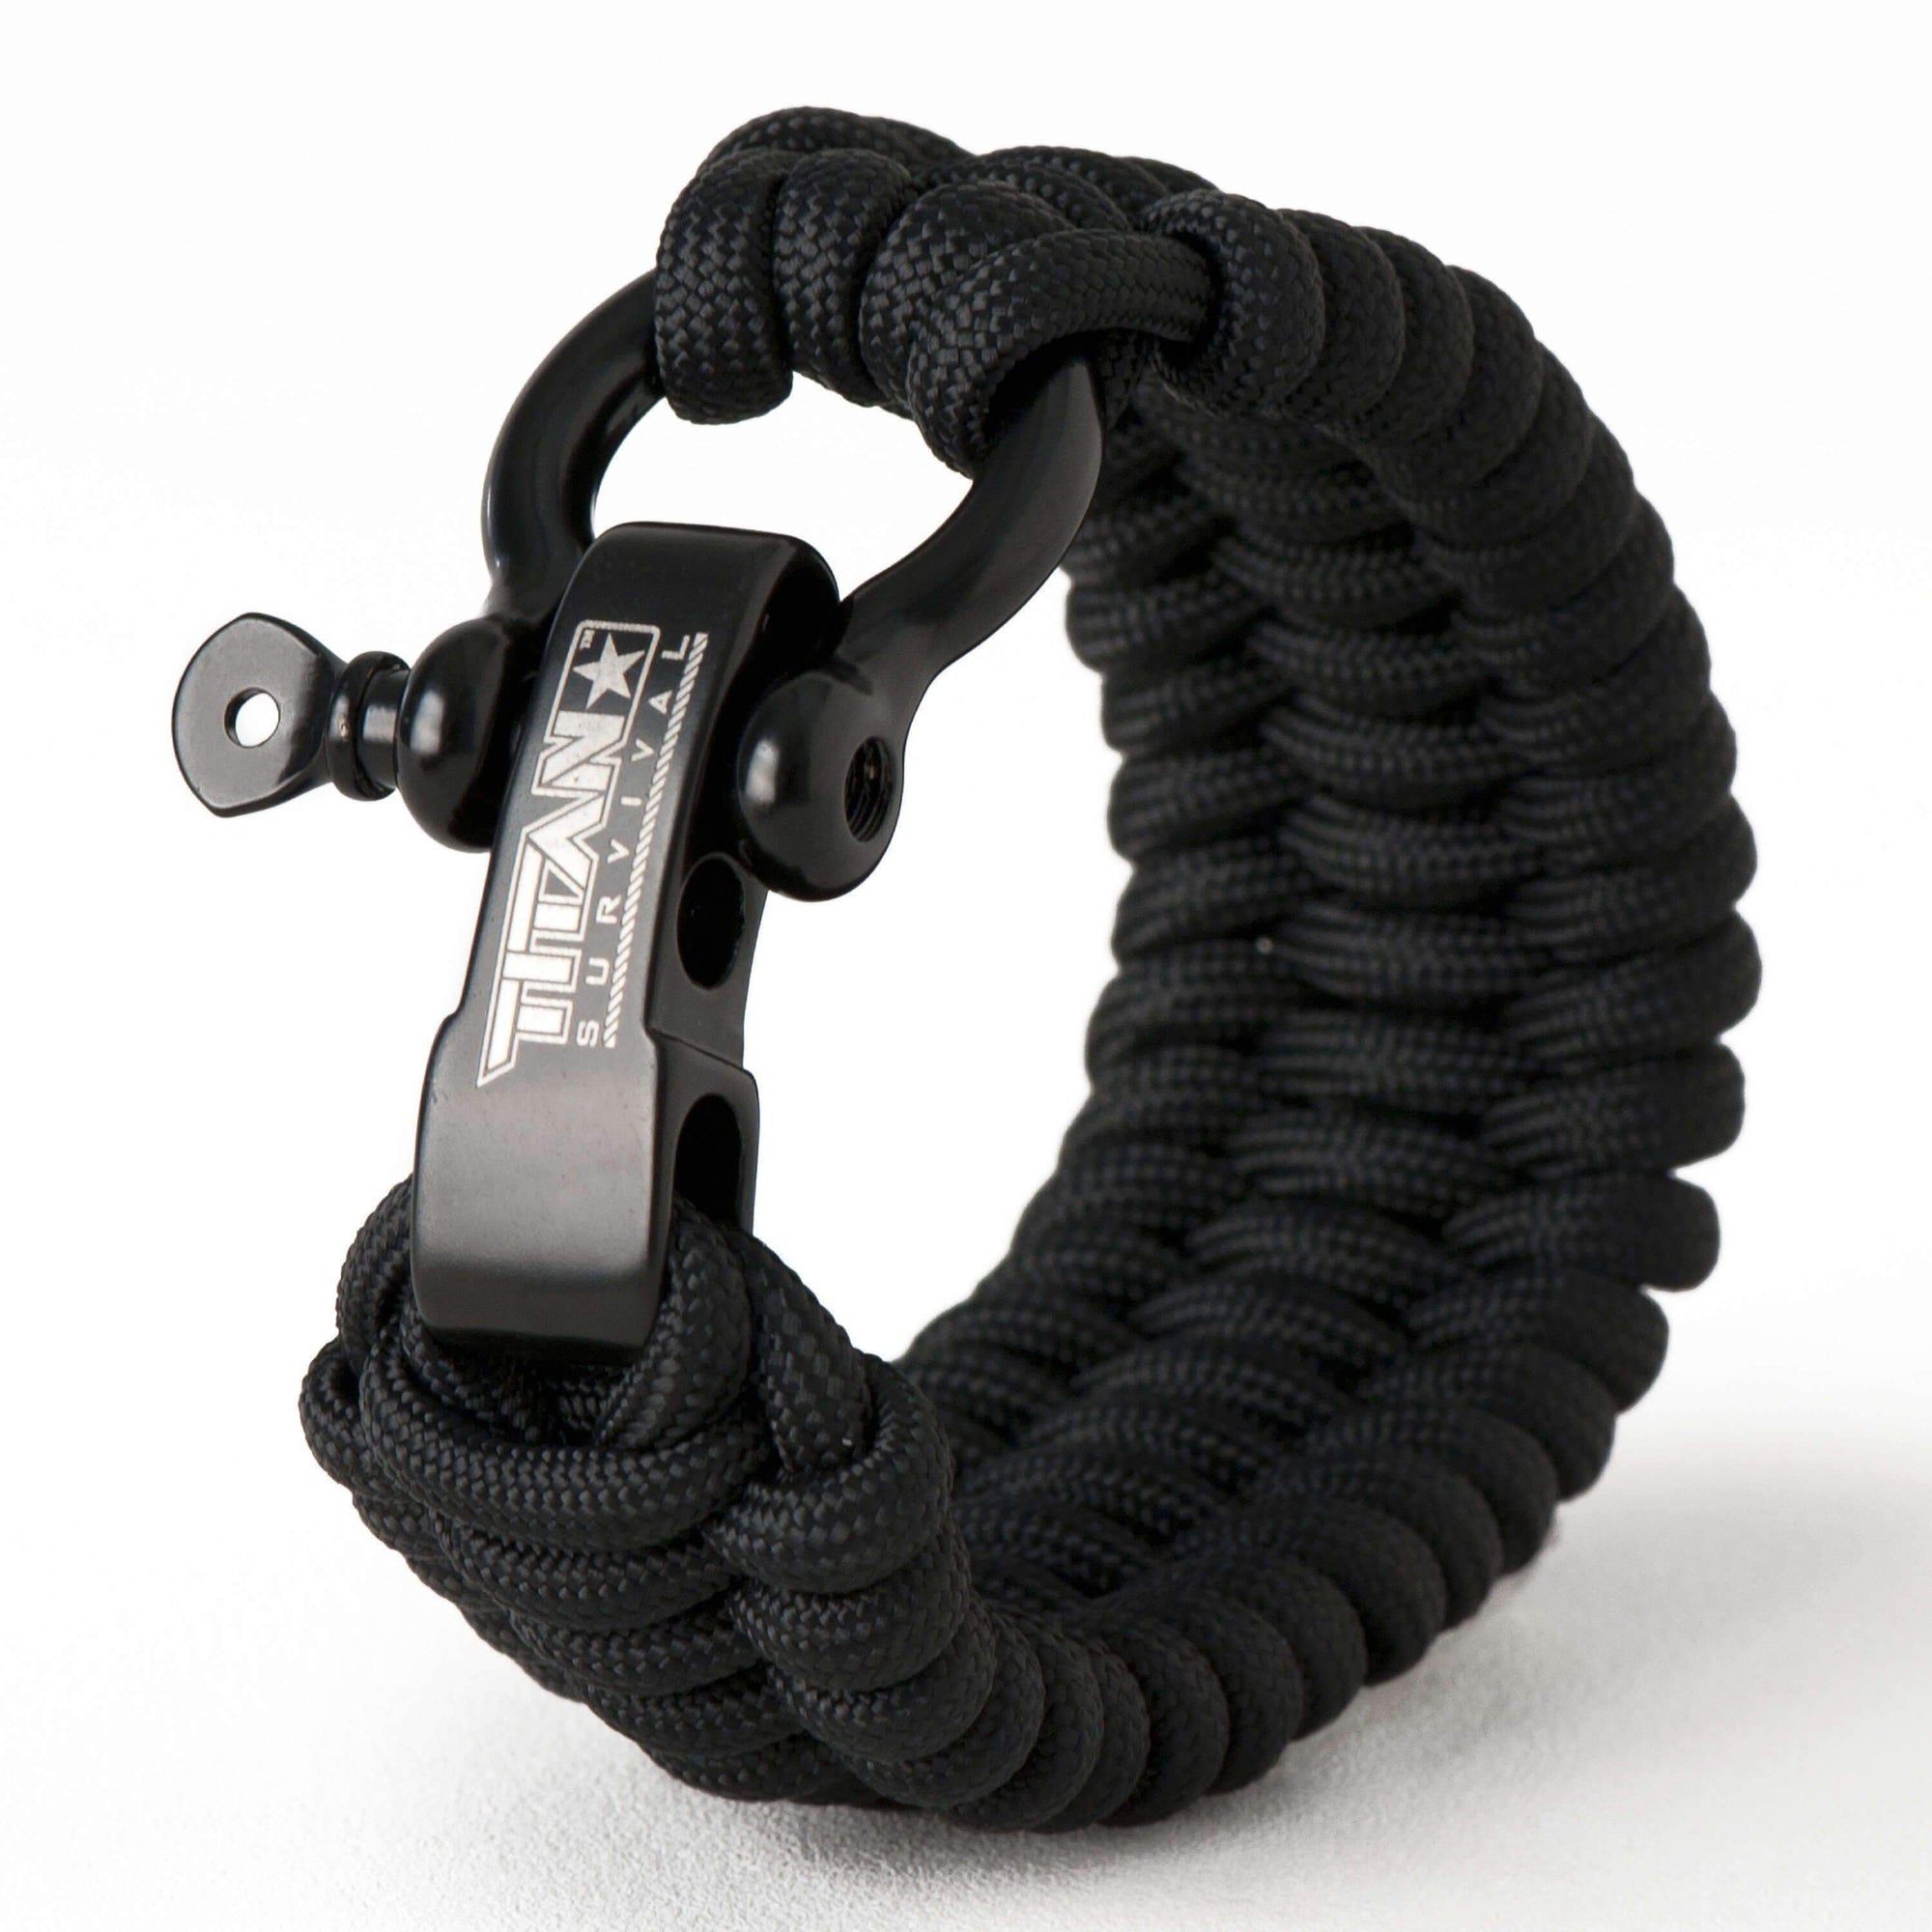 Paracord Adjustable Survival Emergency Glow In The Dark 550 Paracord  Bracelet Parachute Cord Bracelet Wristband Camping Hiking Handmade From  Dvrh, $191.31